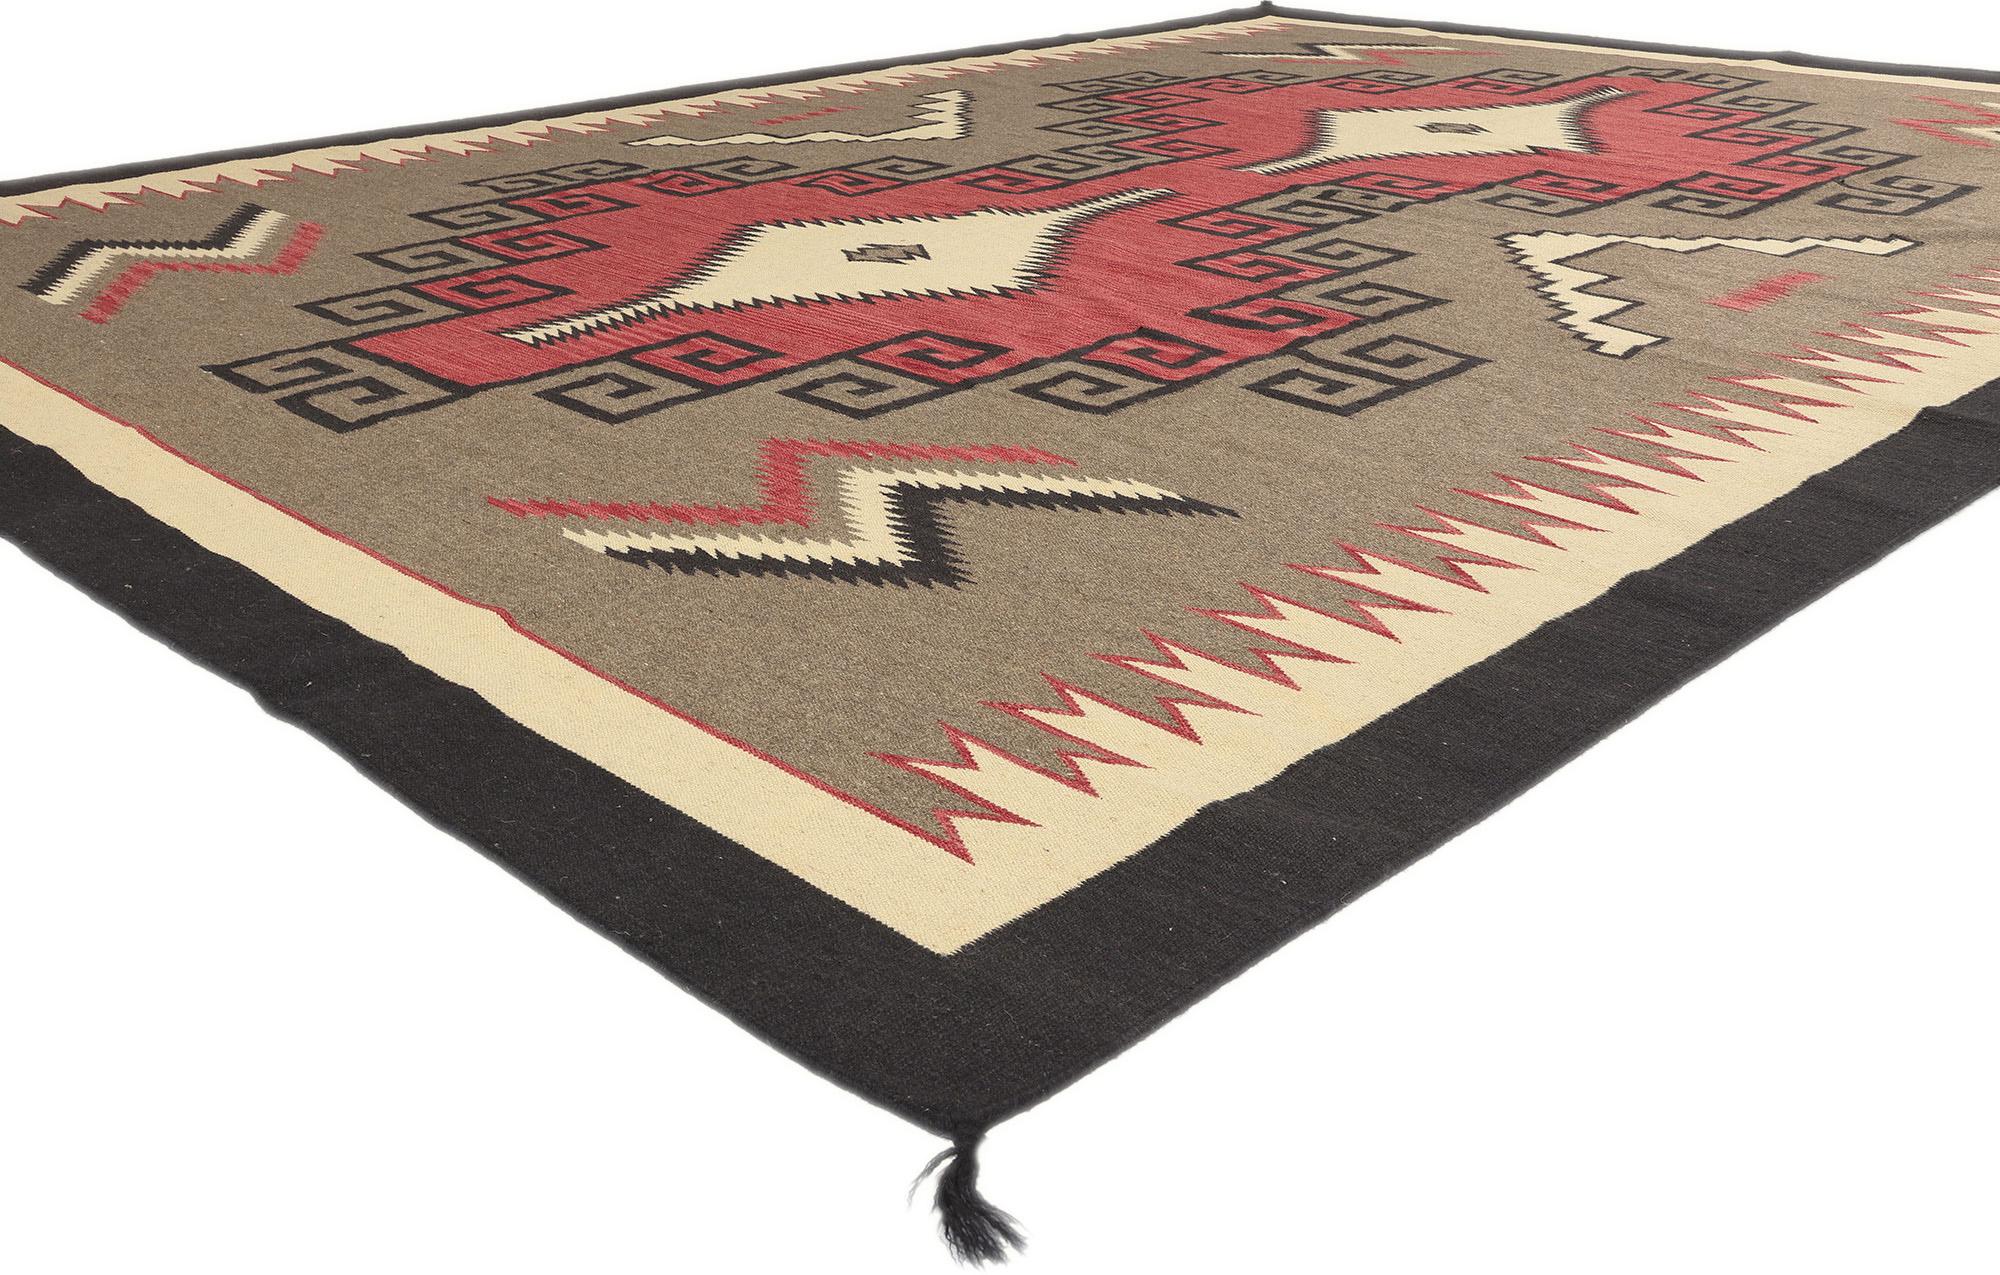 81028 Modern Southwest Ganado Navajo-Style Rug, 08'11 x 12'02. Transform your living space with the captivating allure of Southwest Modern aesthetics embodied in this meticulously handwoven wool Ganado Navajo-style rug. A testament to the seamless